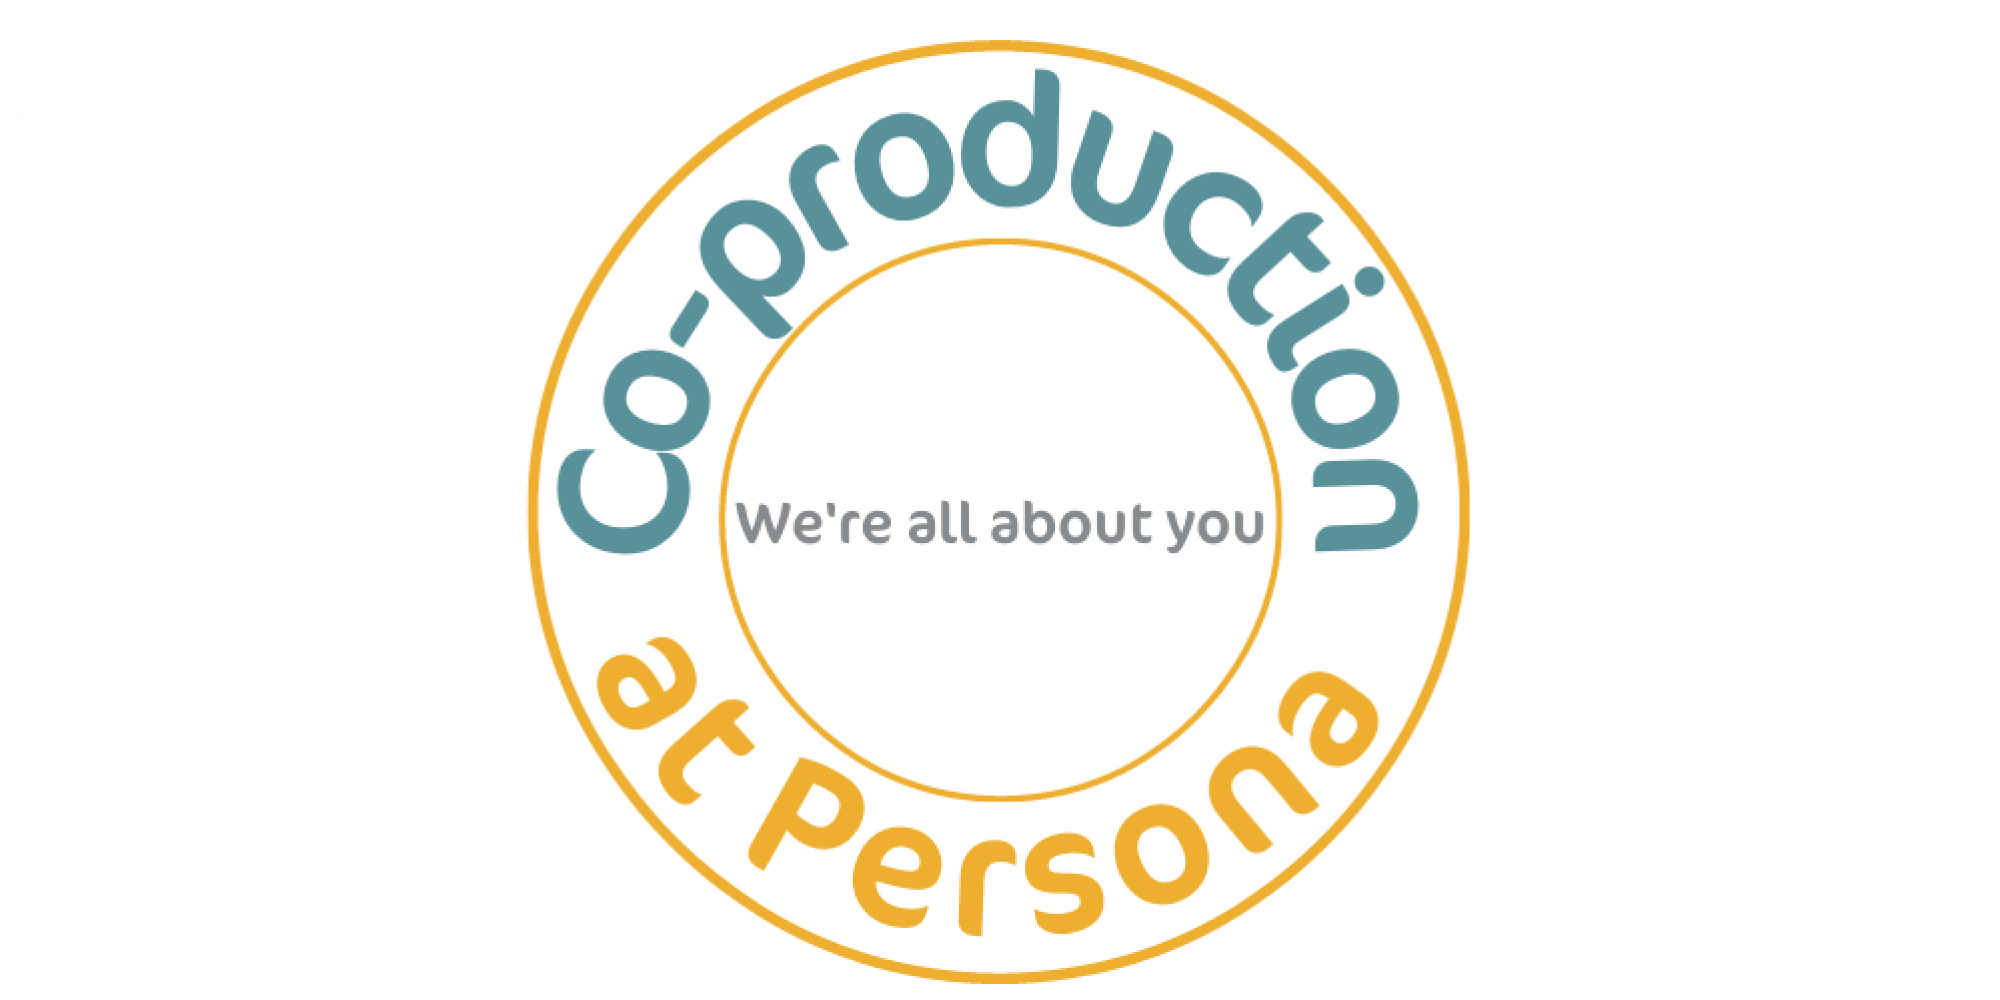 Co-production